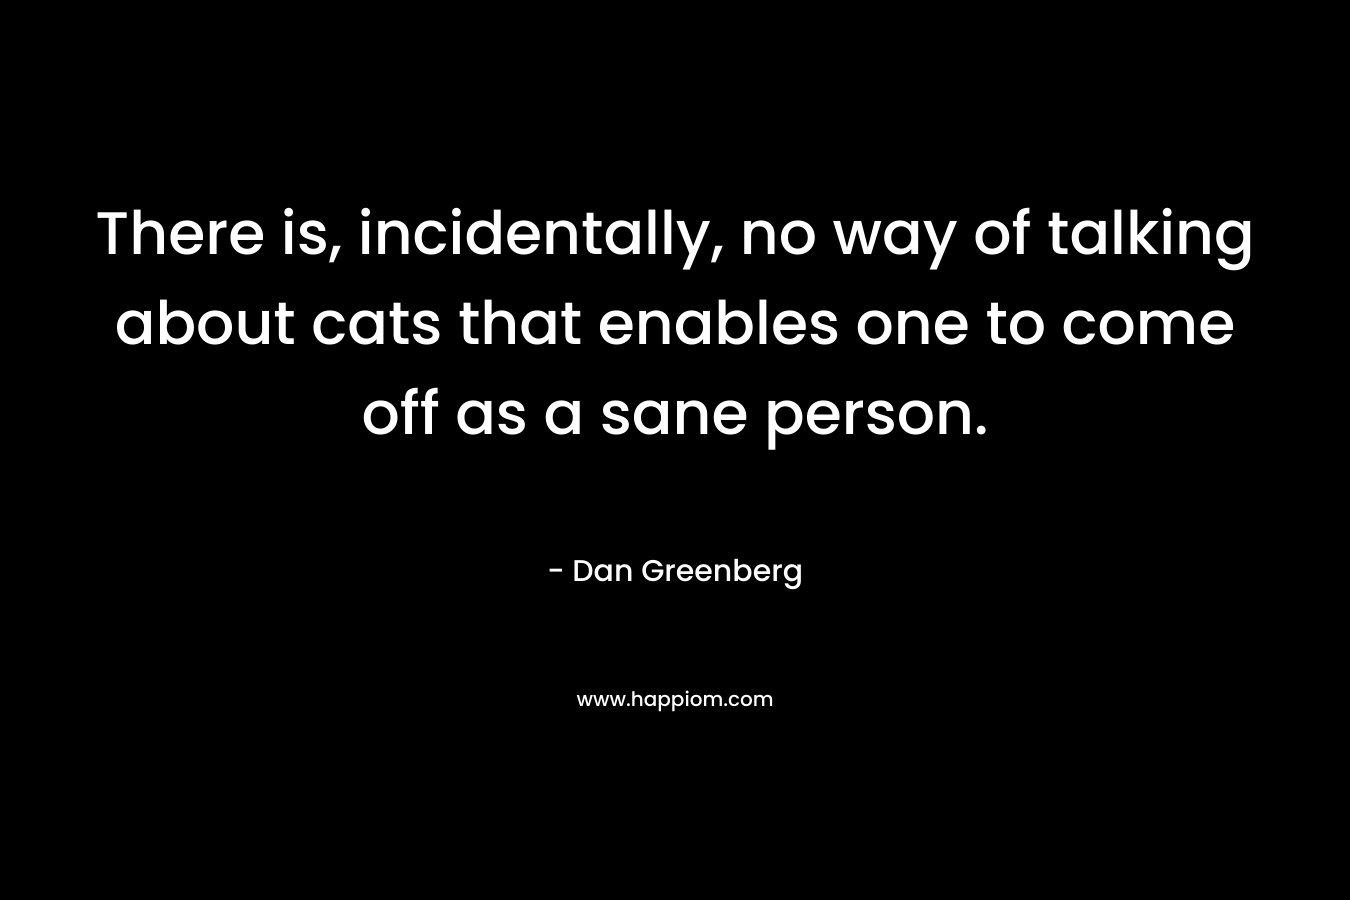 There is, incidentally, no way of talking about cats that enables one to come off as a sane person.